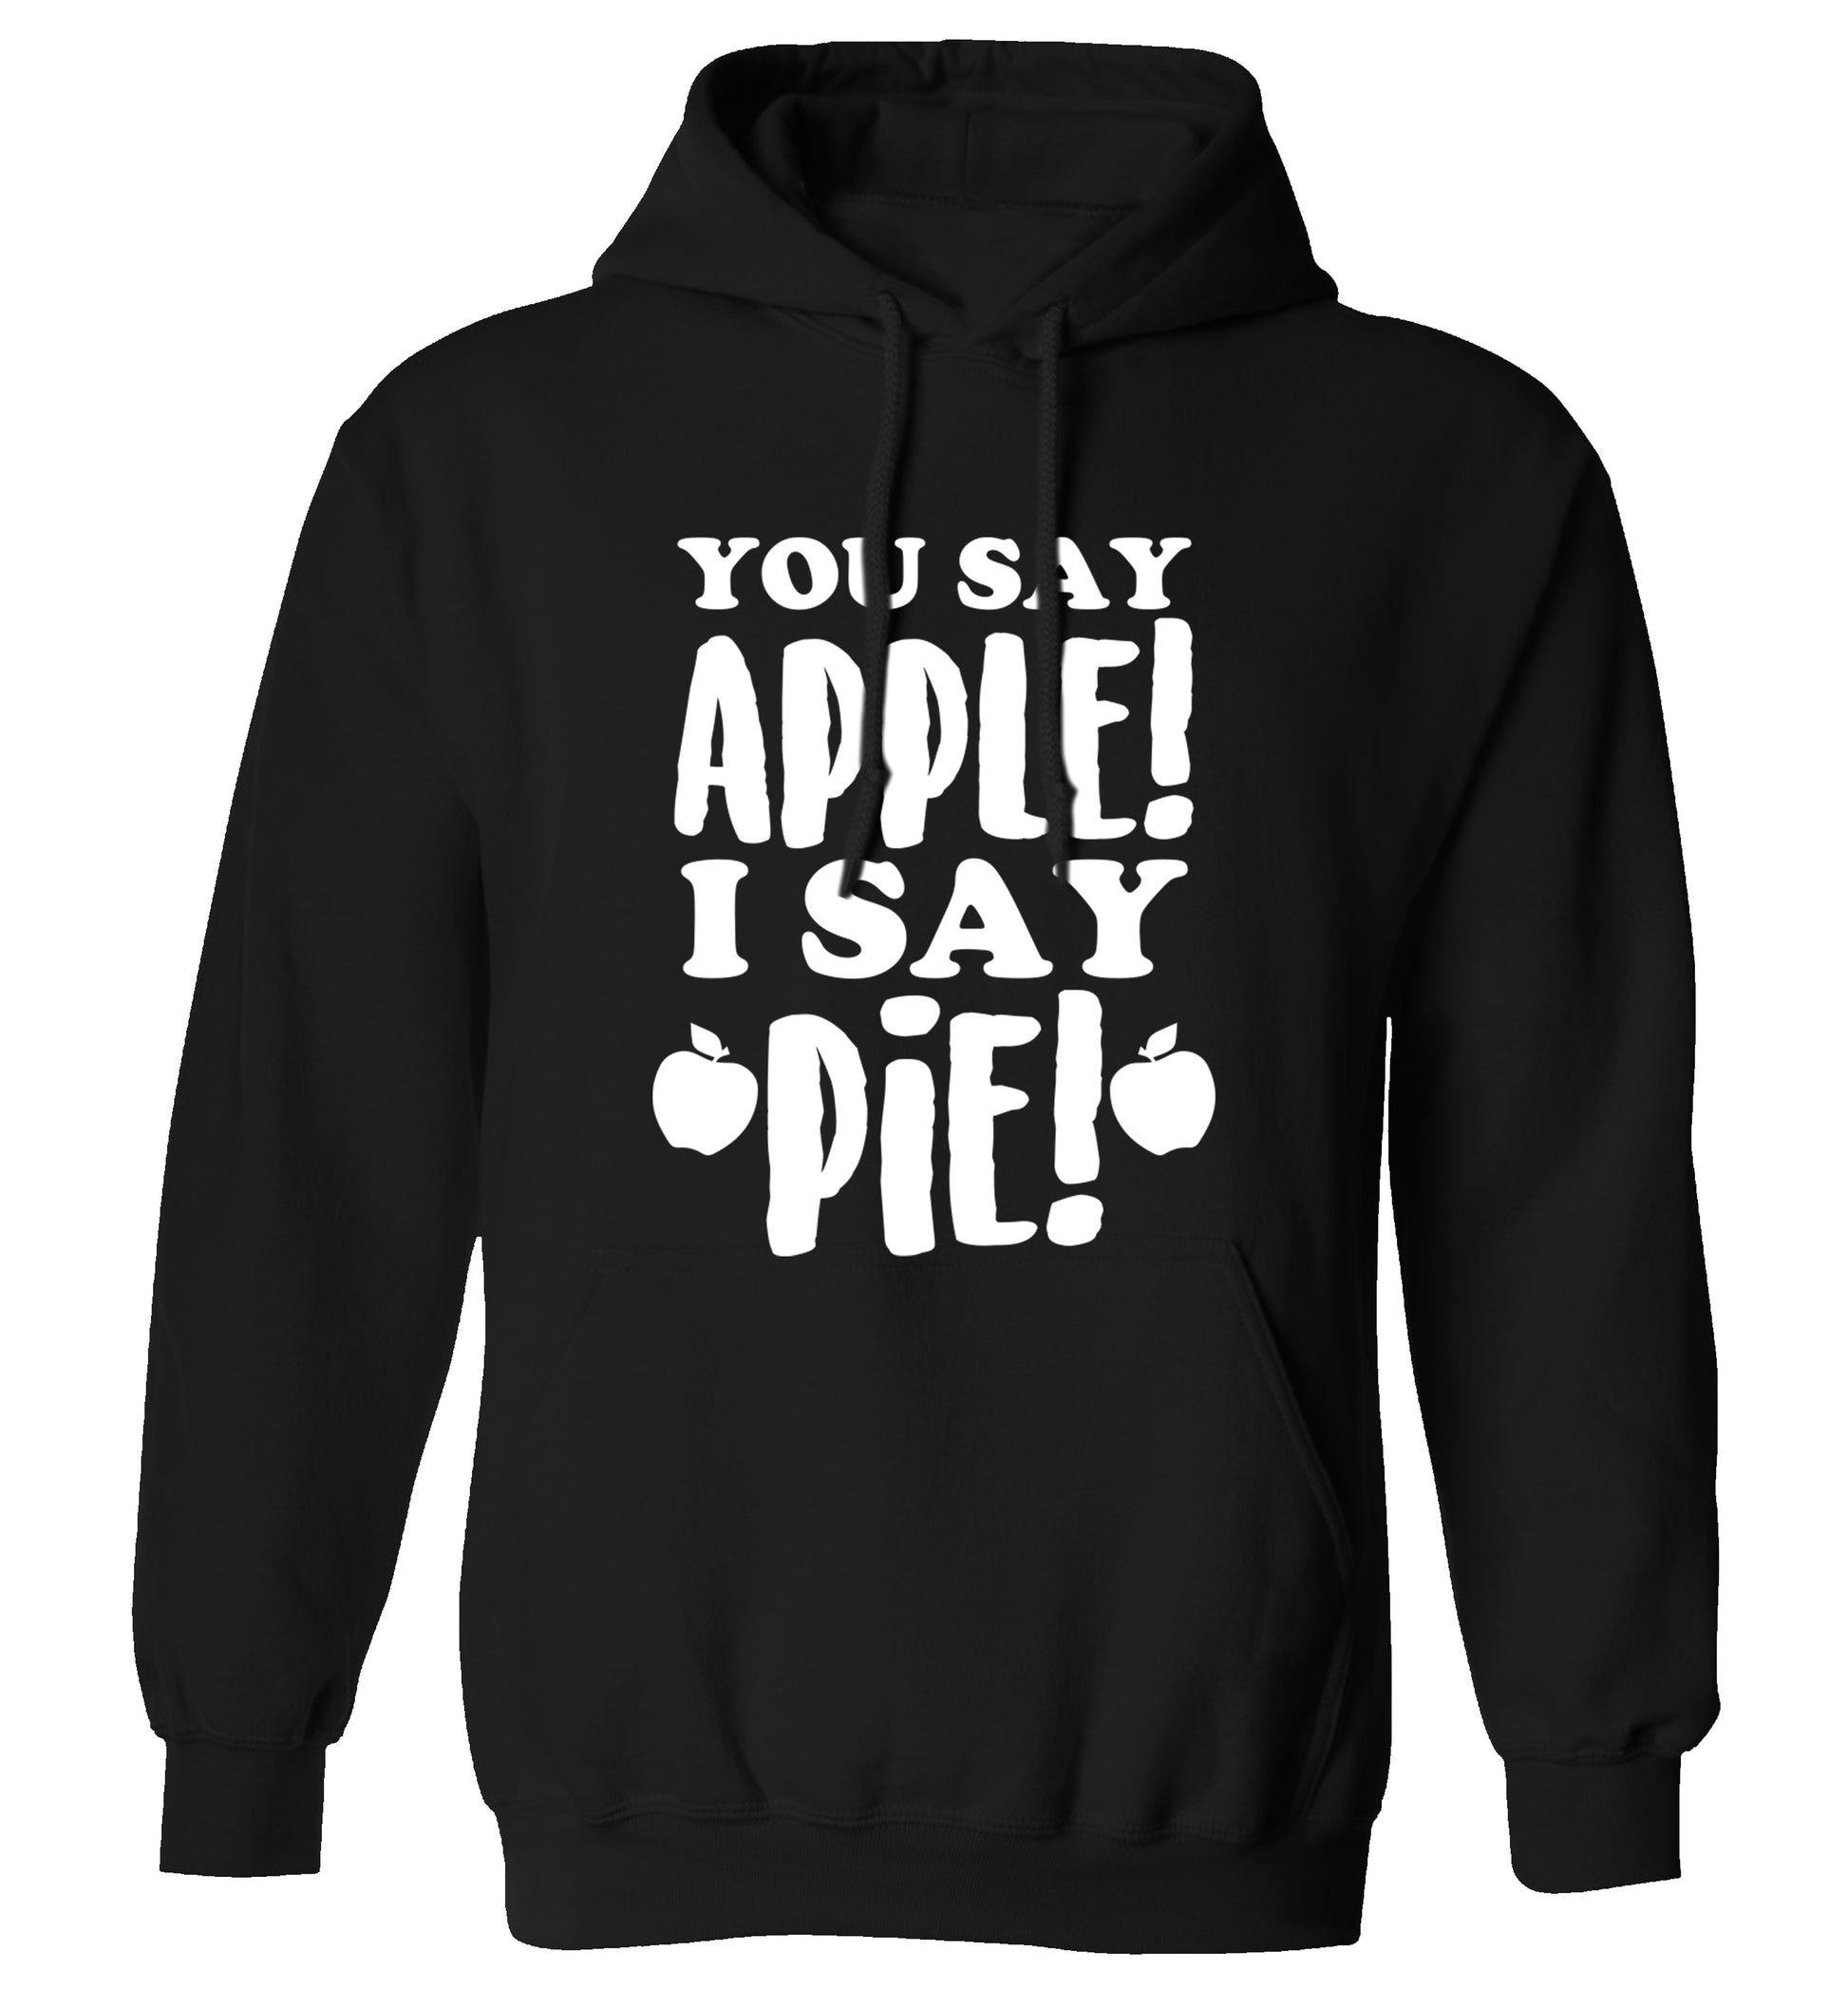 You say apple I say pie! adults unisex black hoodie 2XL